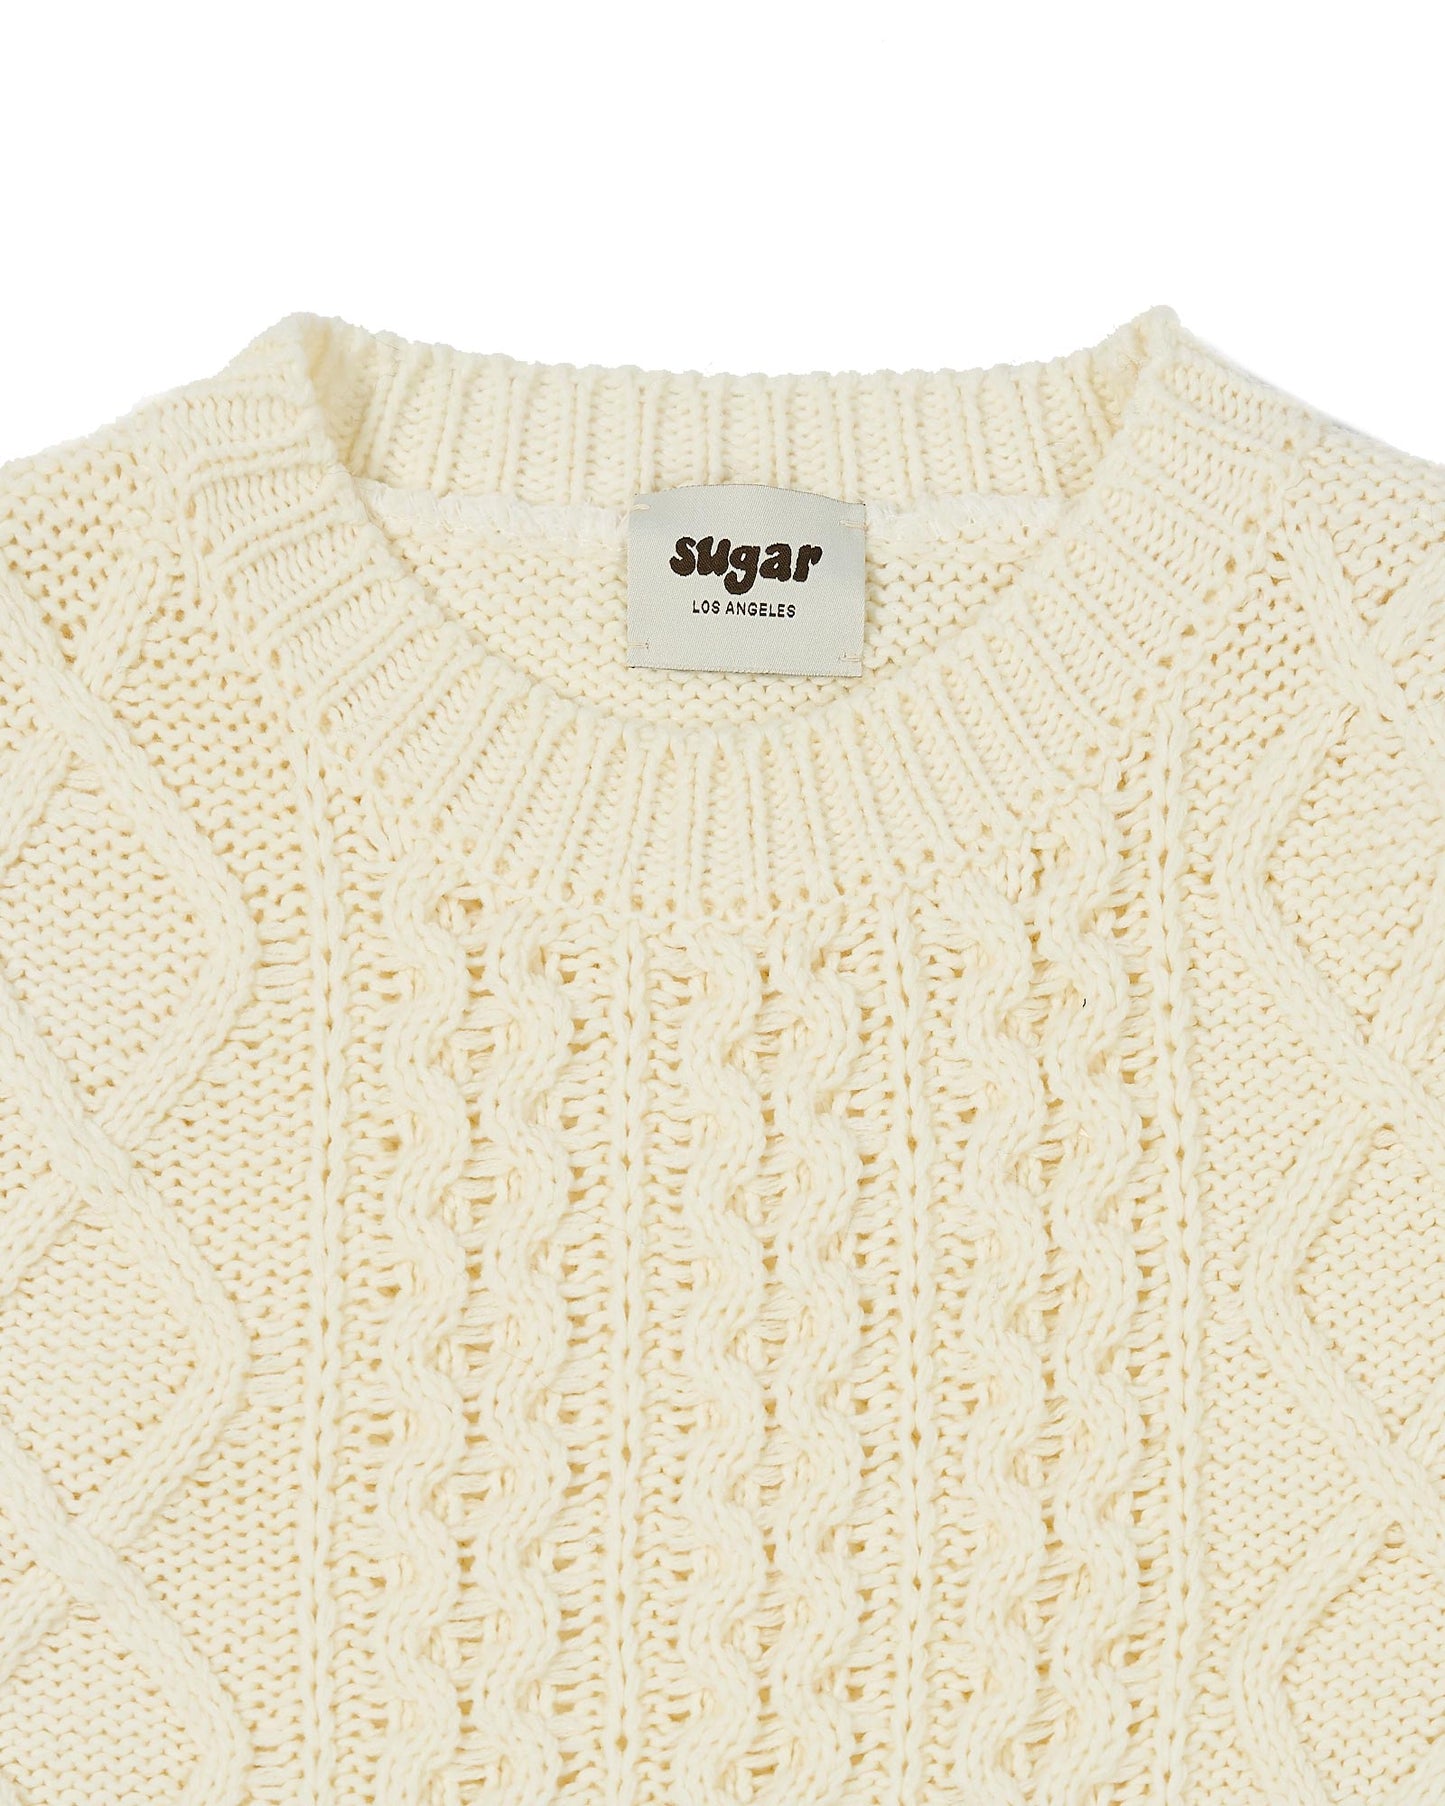 Load image into Gallery viewer, Destroyed Pullover Sweater - Cream
